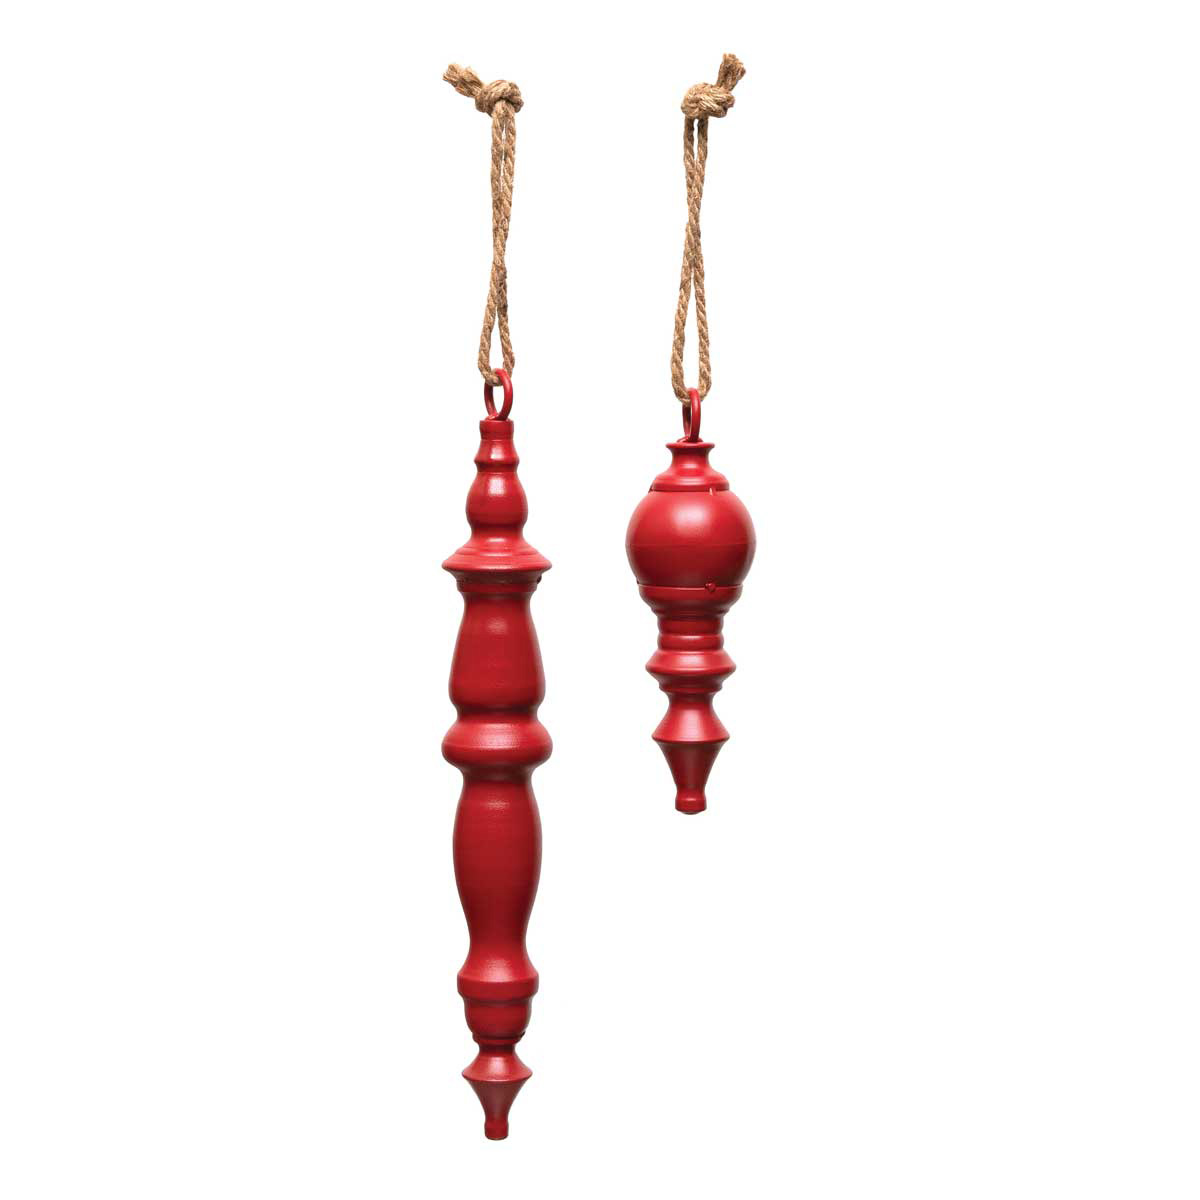 ORNAMENT FINIAL MATTE RED SMALL 2.75IN X 9IN METAL - Click Image to Close